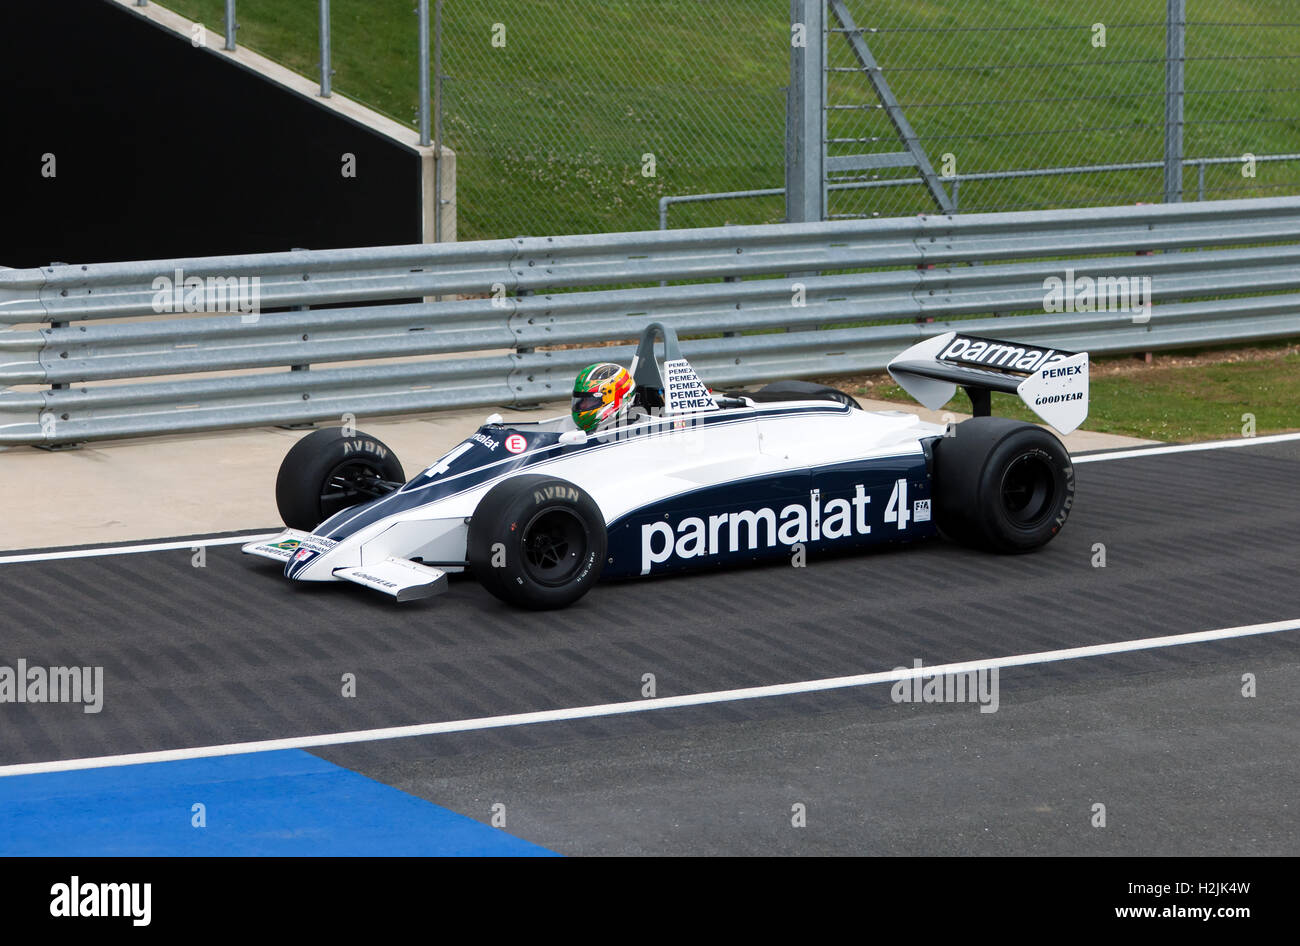 Joaquin Folch-Rusinol driving a 1981 Brabham BT49C during qualifying for the FIA Masters Historic Formula One Race, Silverstone Stock Photo